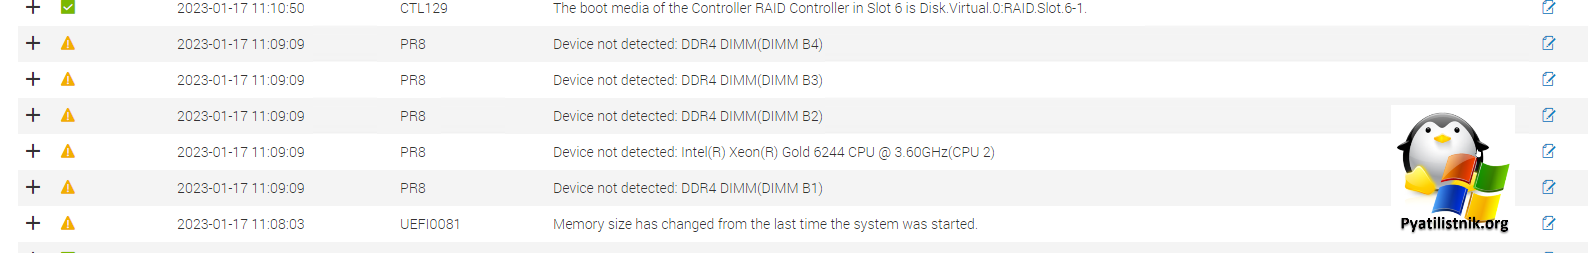 Device not detected Intel(R) Xeon(R) Gold 6244 CPU @ 3.60GHz(CPU 2)